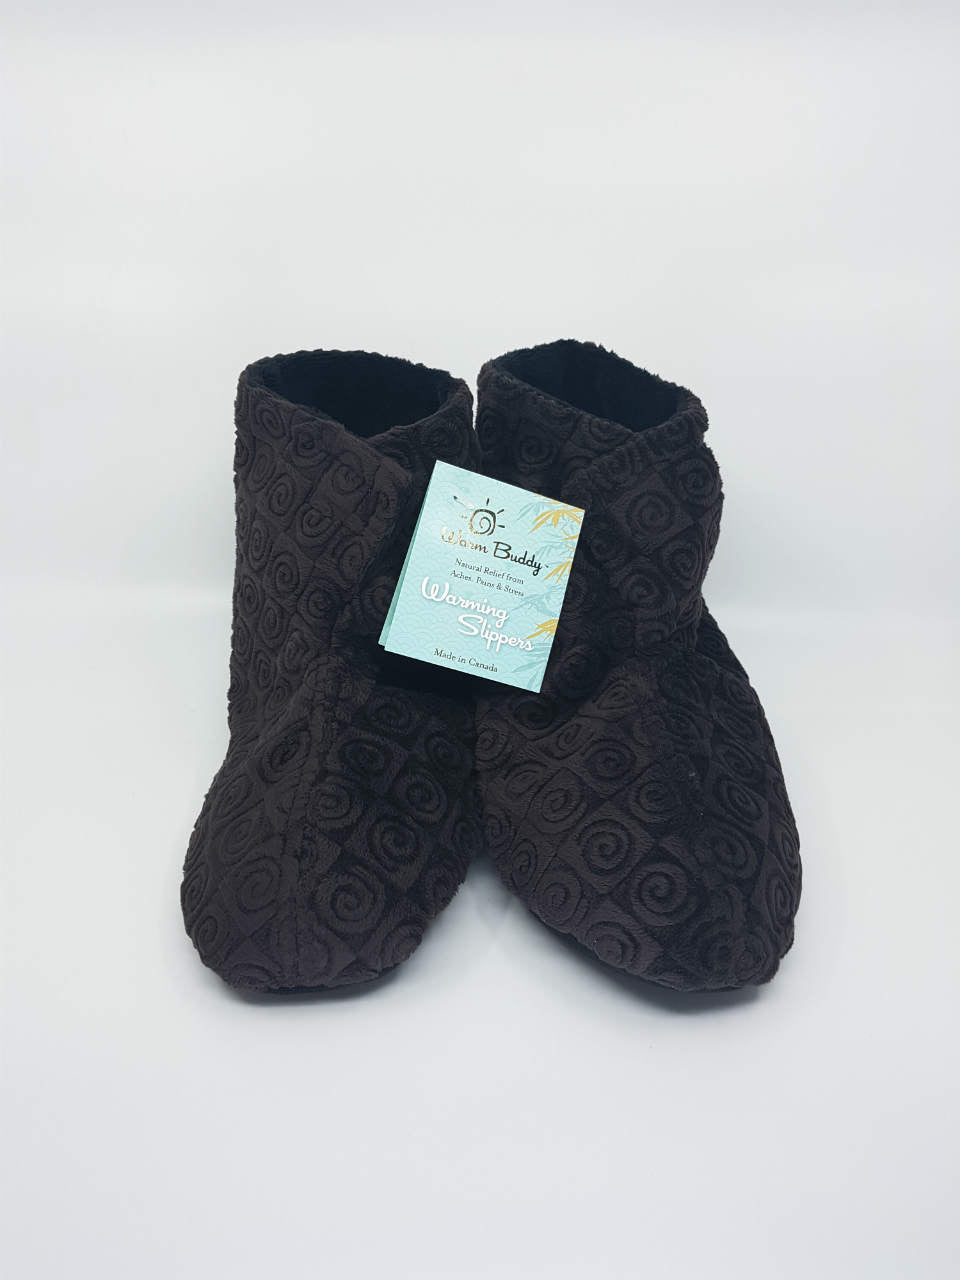 warming booties for feet